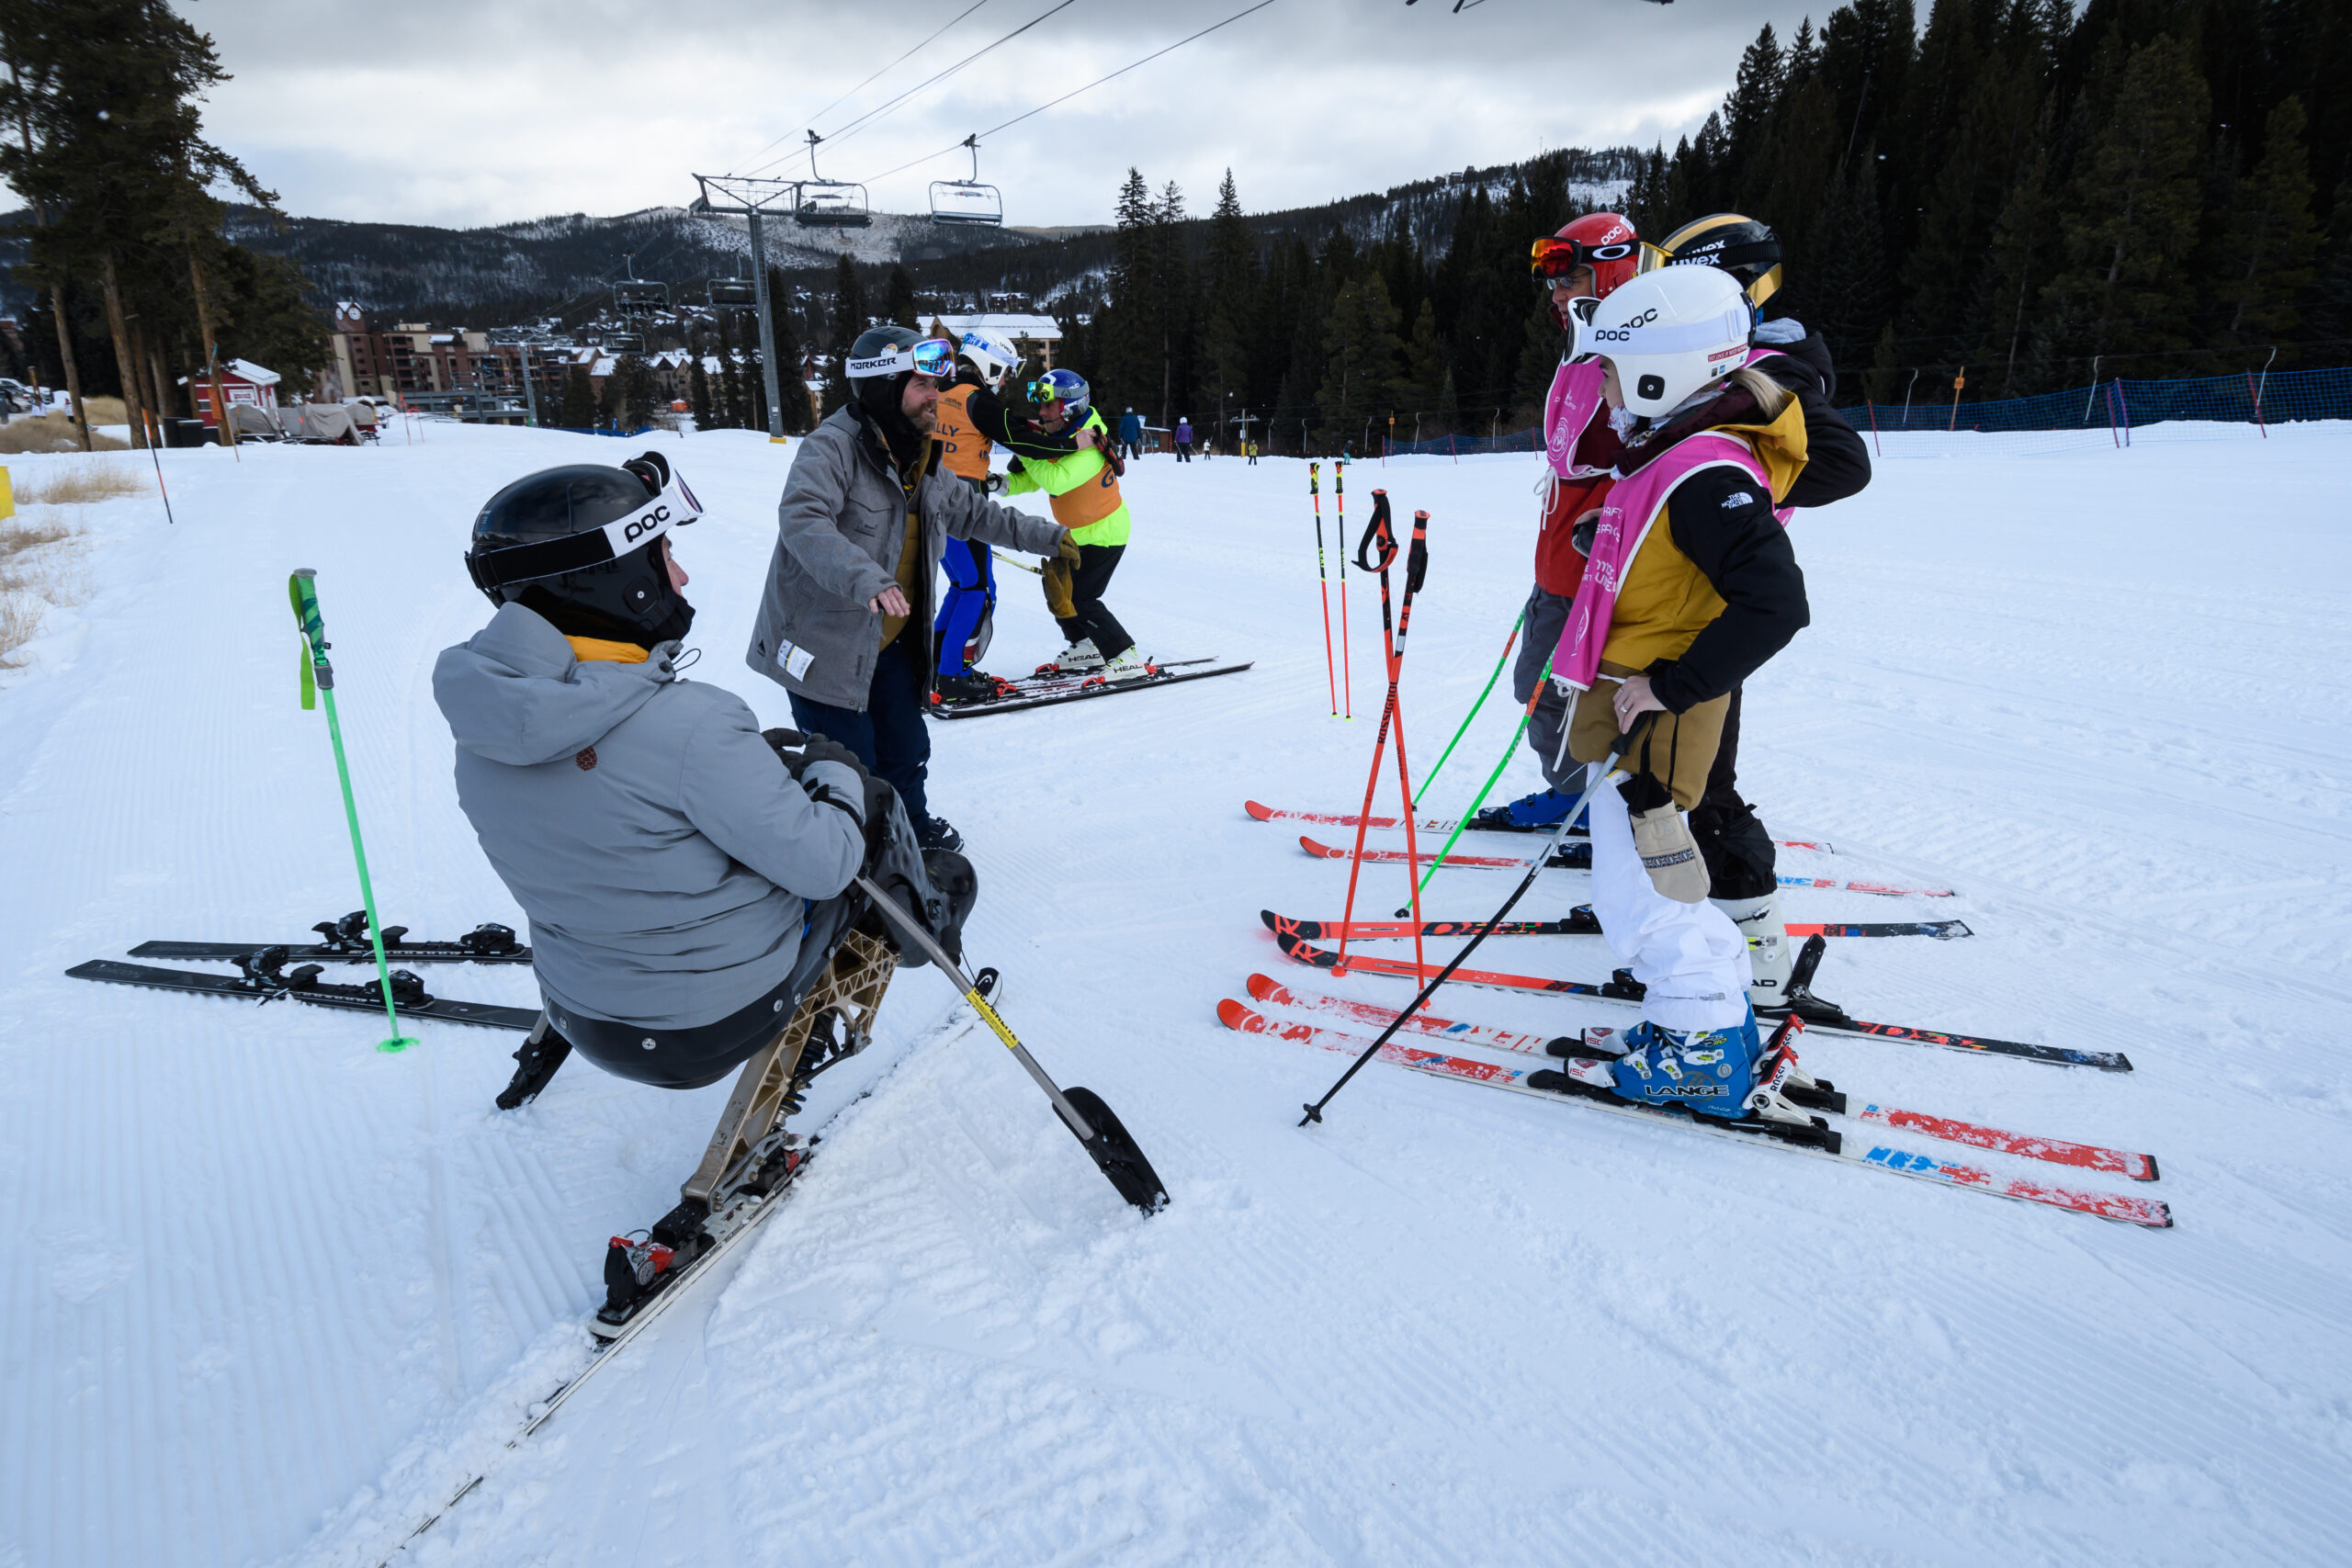 Ski Spectacular Returns for First Live Event in Two Years – PSIA-AASI